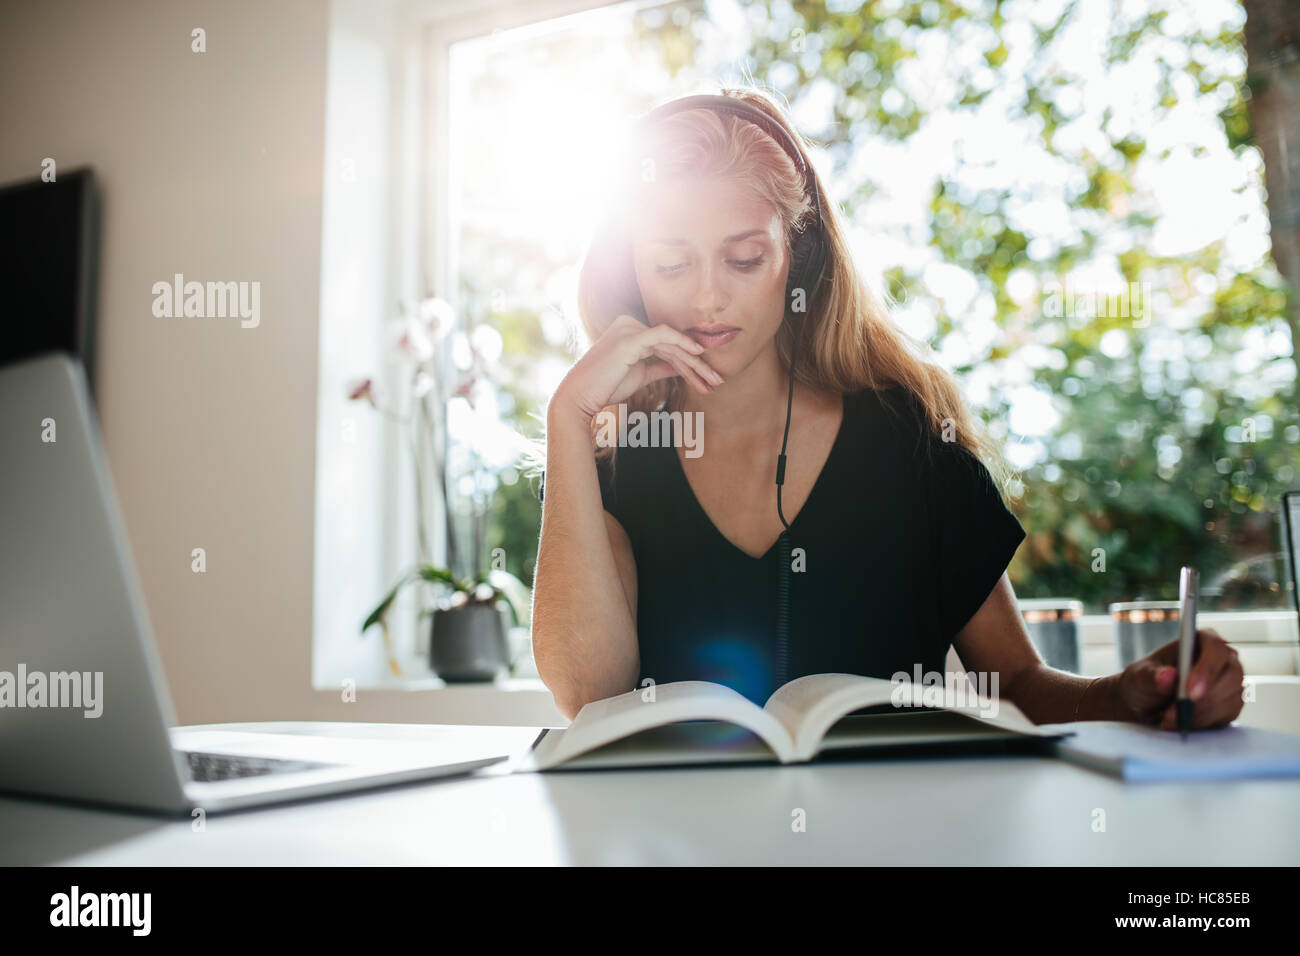 Young woman sitting at table with laptop and taking notes in book. Female student studying at home. Stock Photo